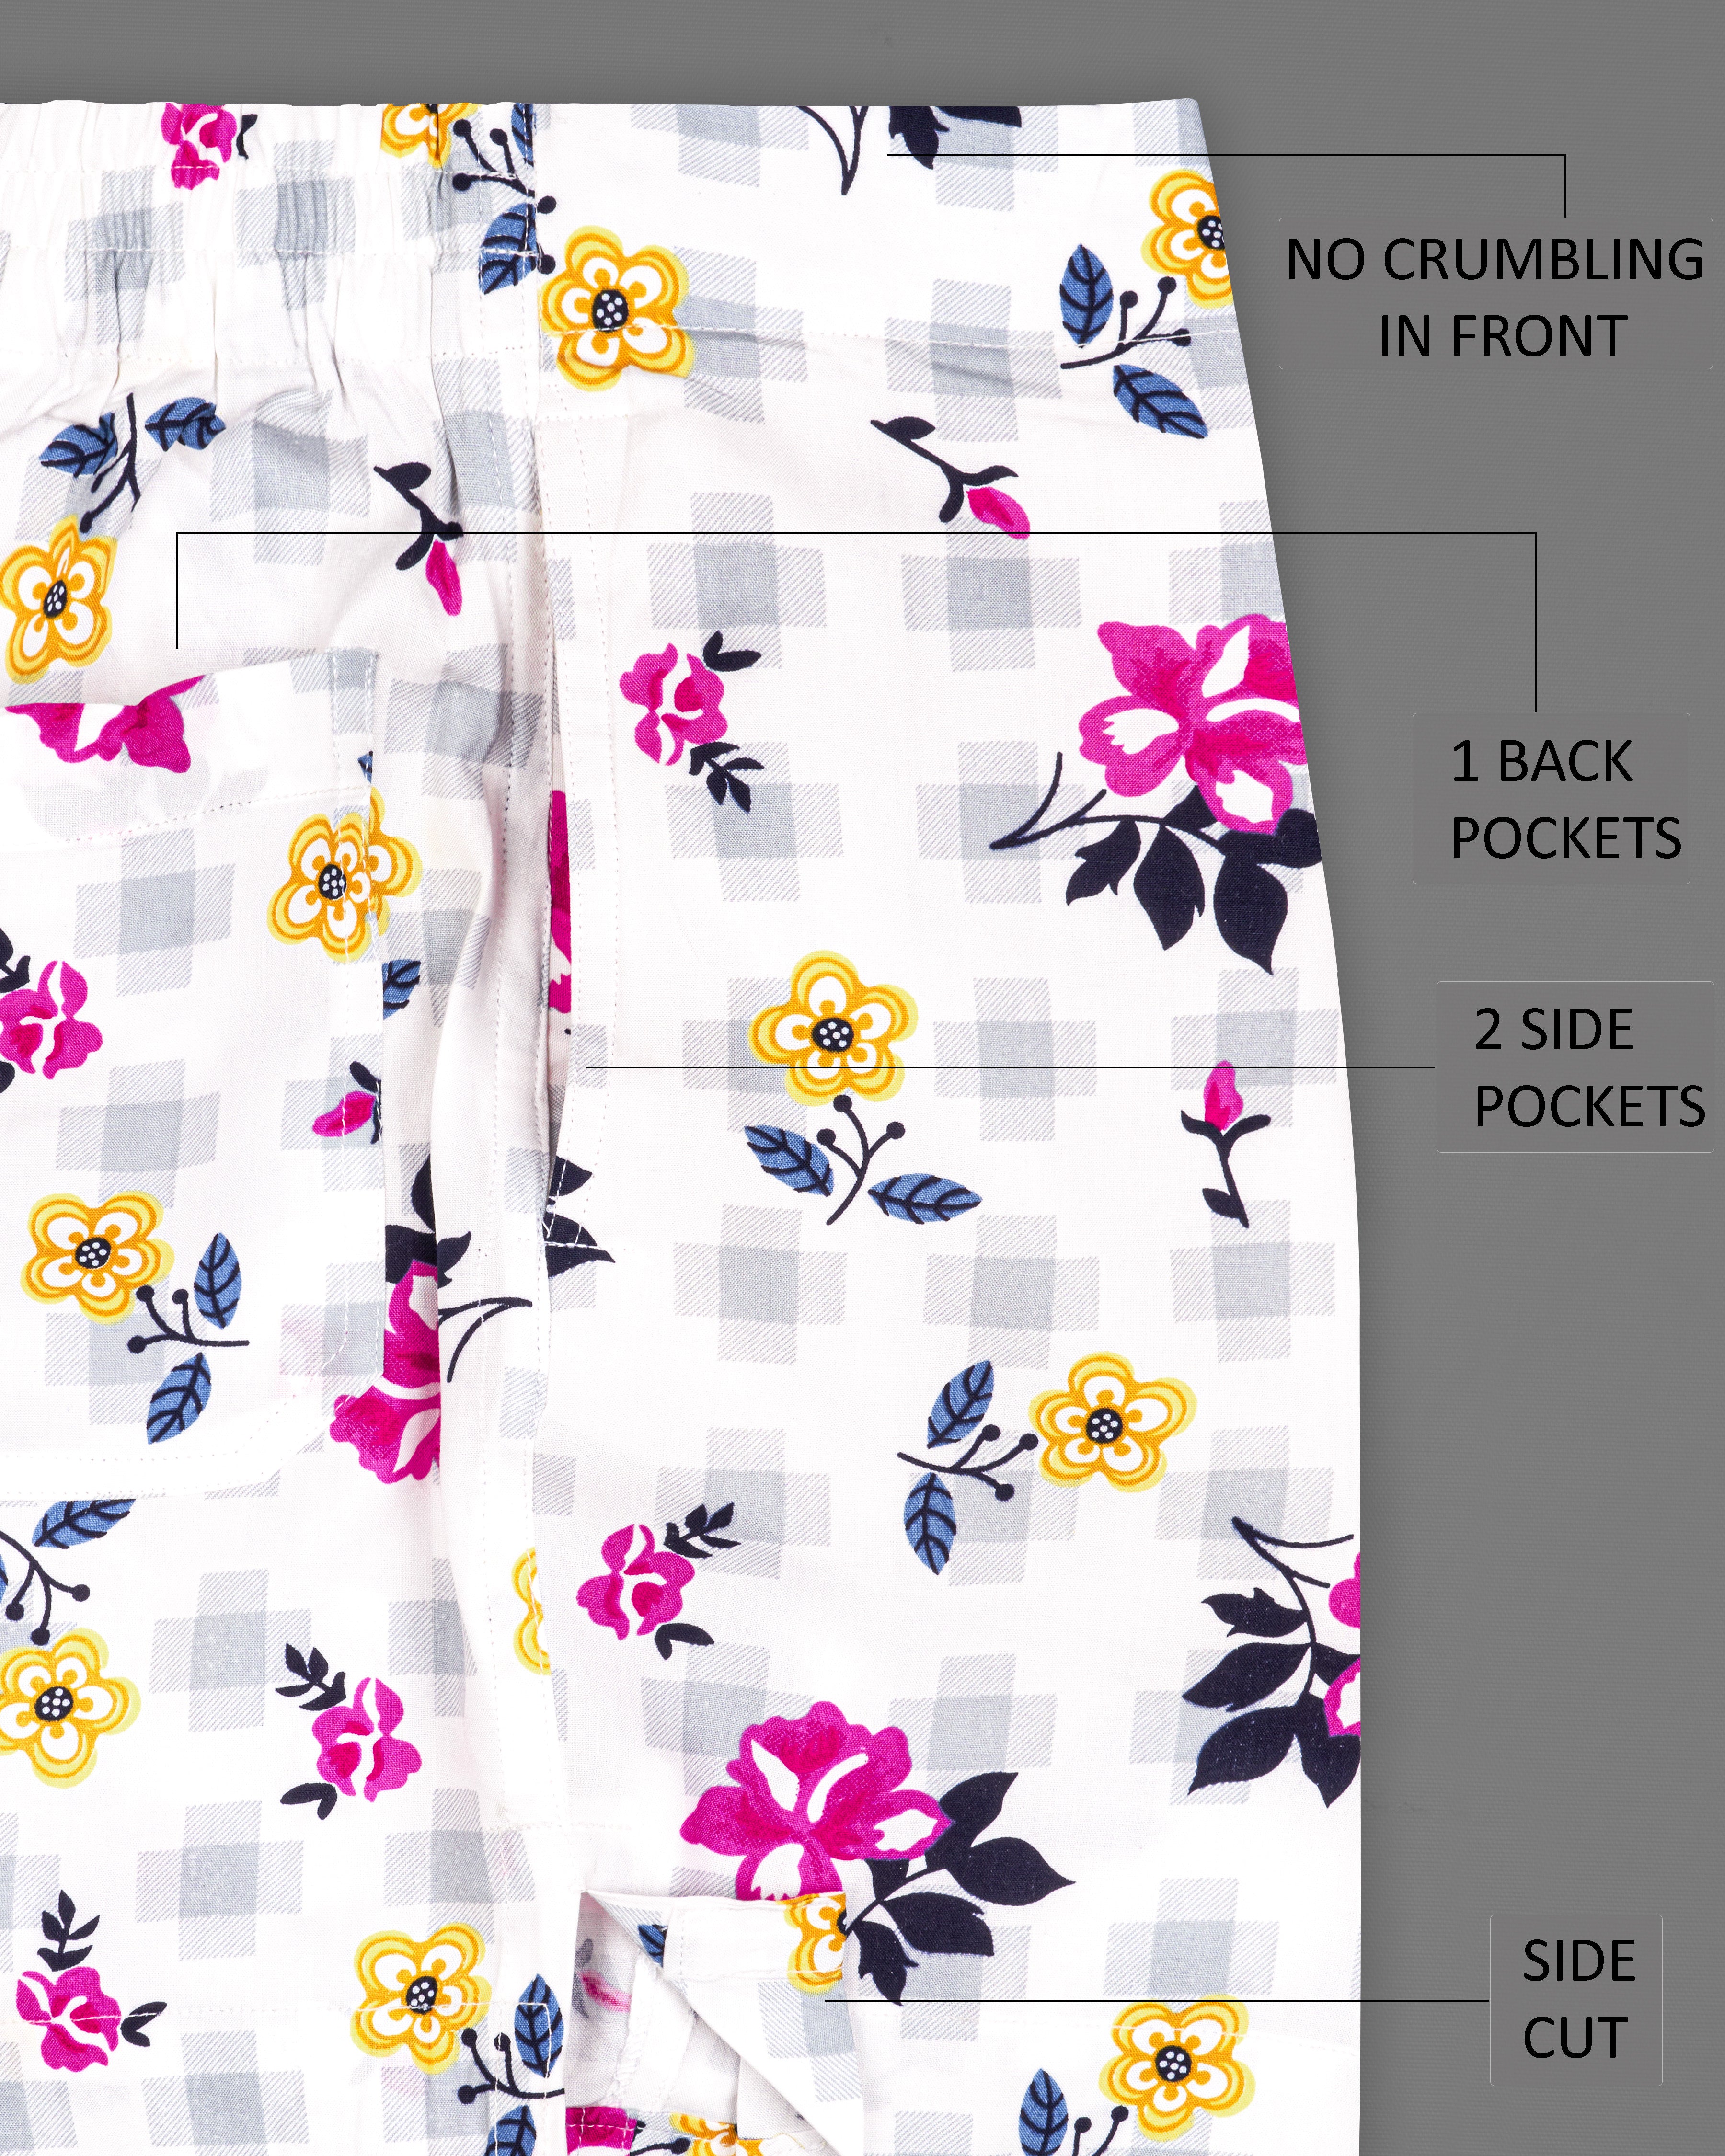 Bright White Floral Printed with Desert Storm Yellow Floral Printed Premium Cotton Boxers BX494-BX449-28, BX494-BX449-30, BX494-BX449-32, BX494-BX449-34, BX494-BX449-36, BX494-BX449-38, BX494-BX449-40, BX494-BX449-42, BX494-BX449-44